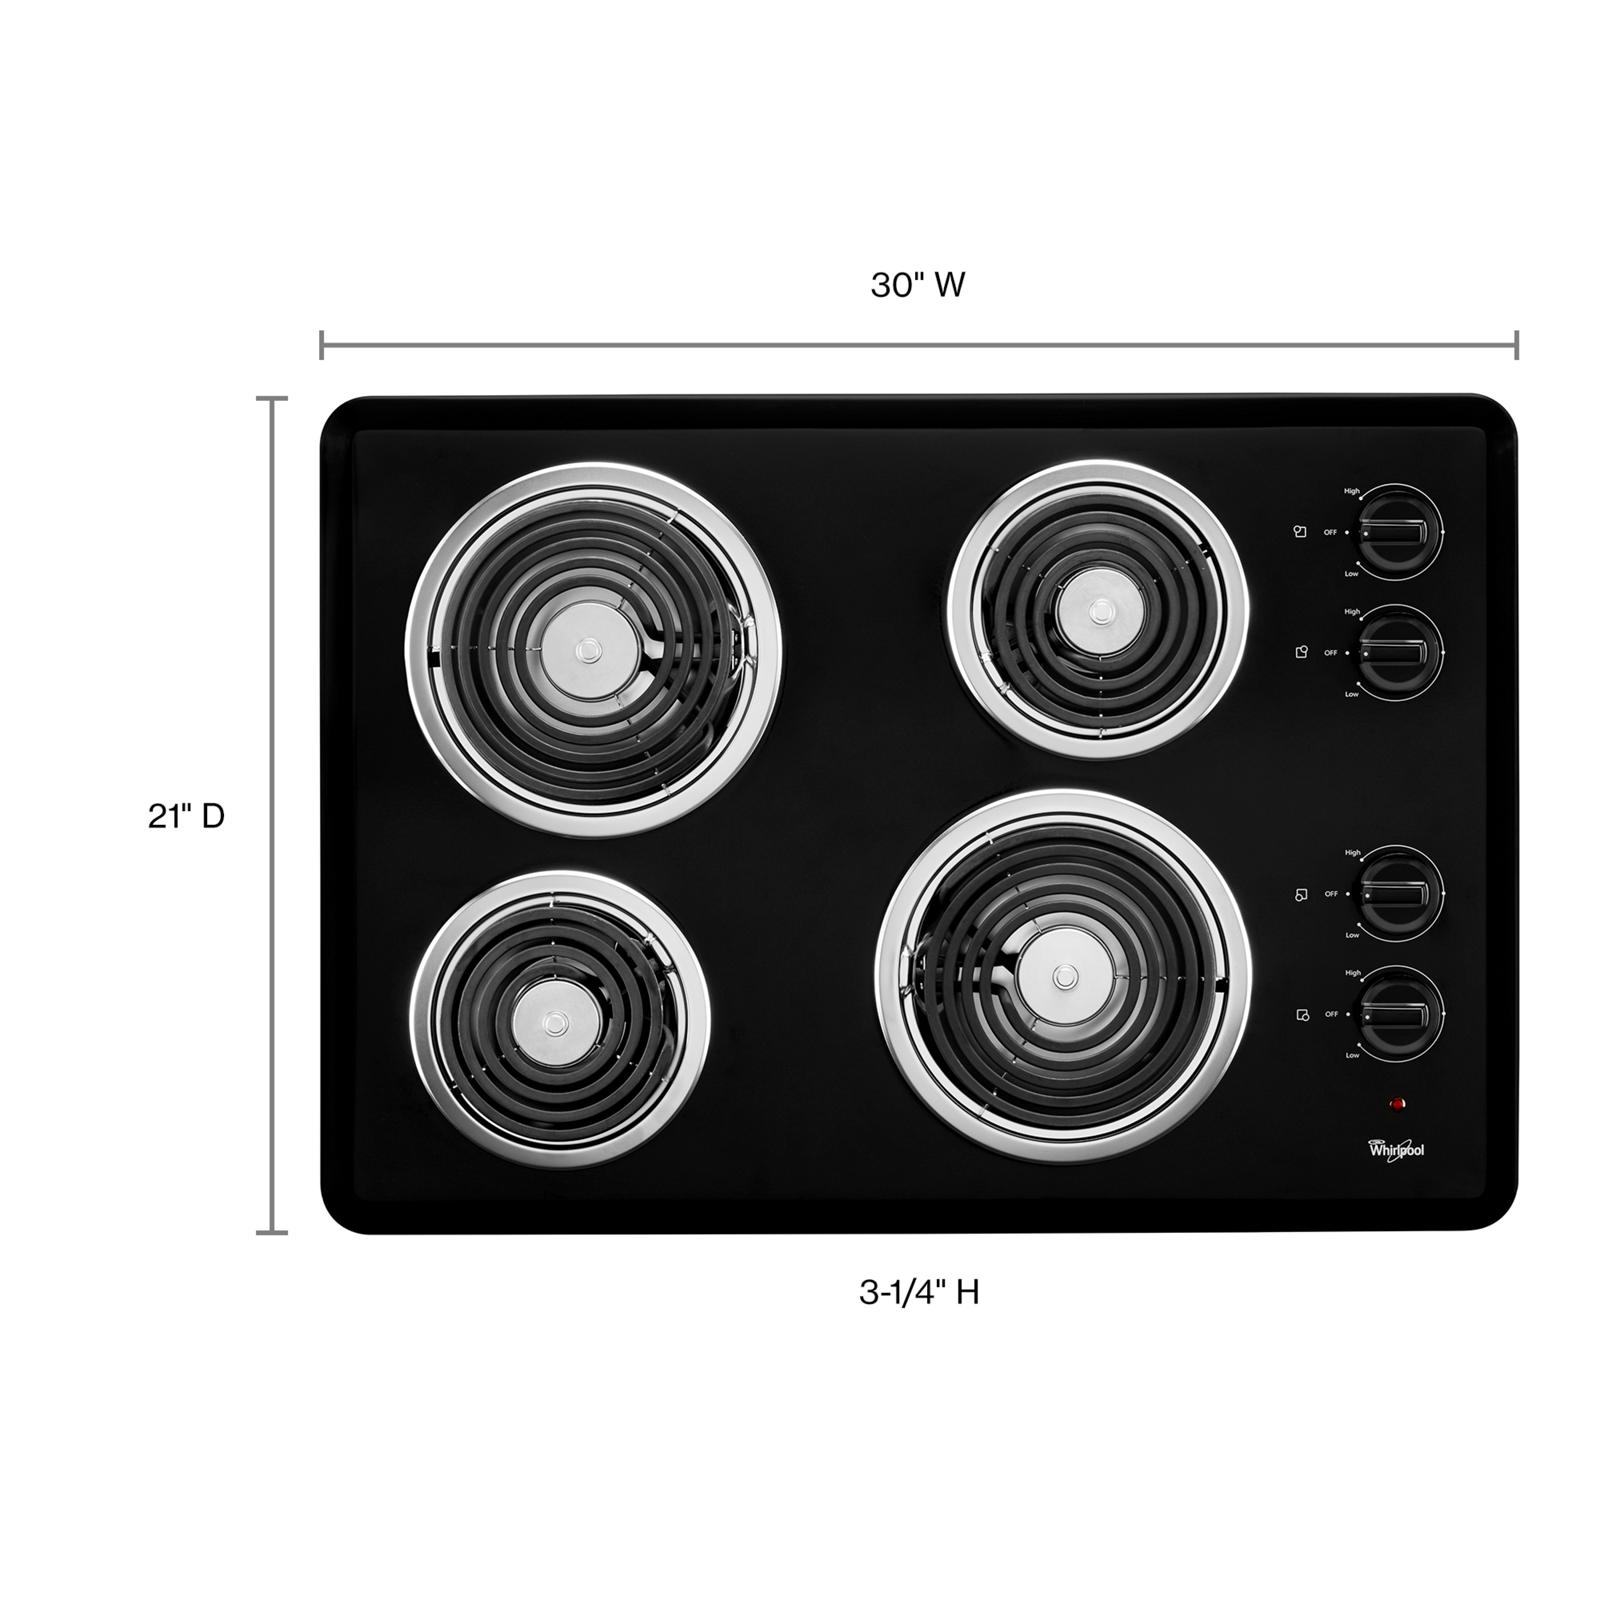 Double Electric Burner Cooktop with Adjustable Temperature - Model - 34115